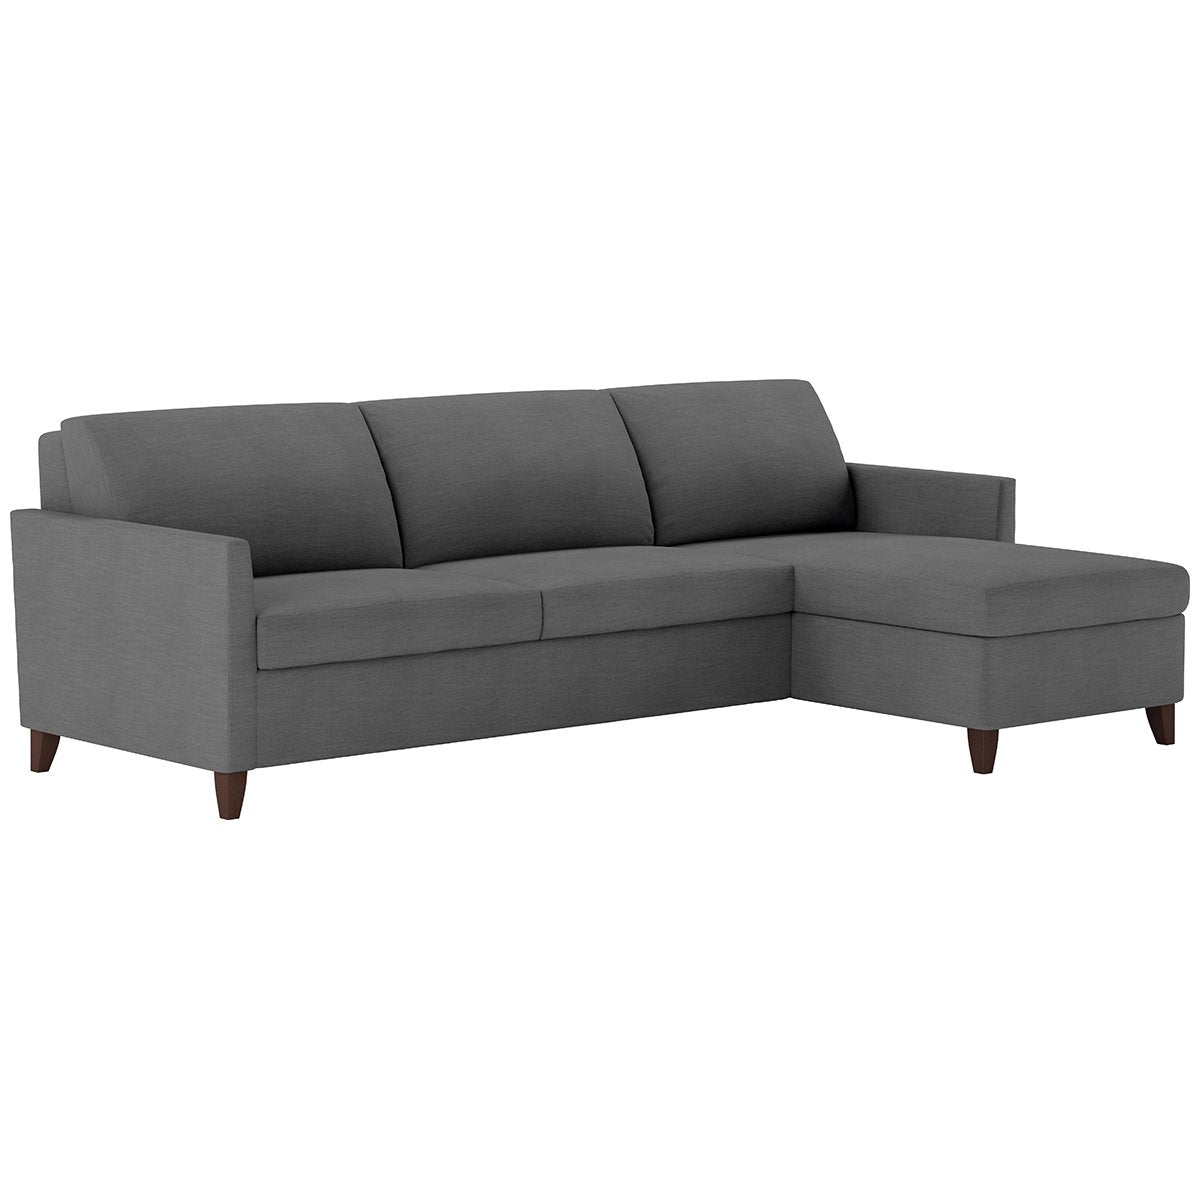 Harris Upholstery Comfort Sleeper by American Leather